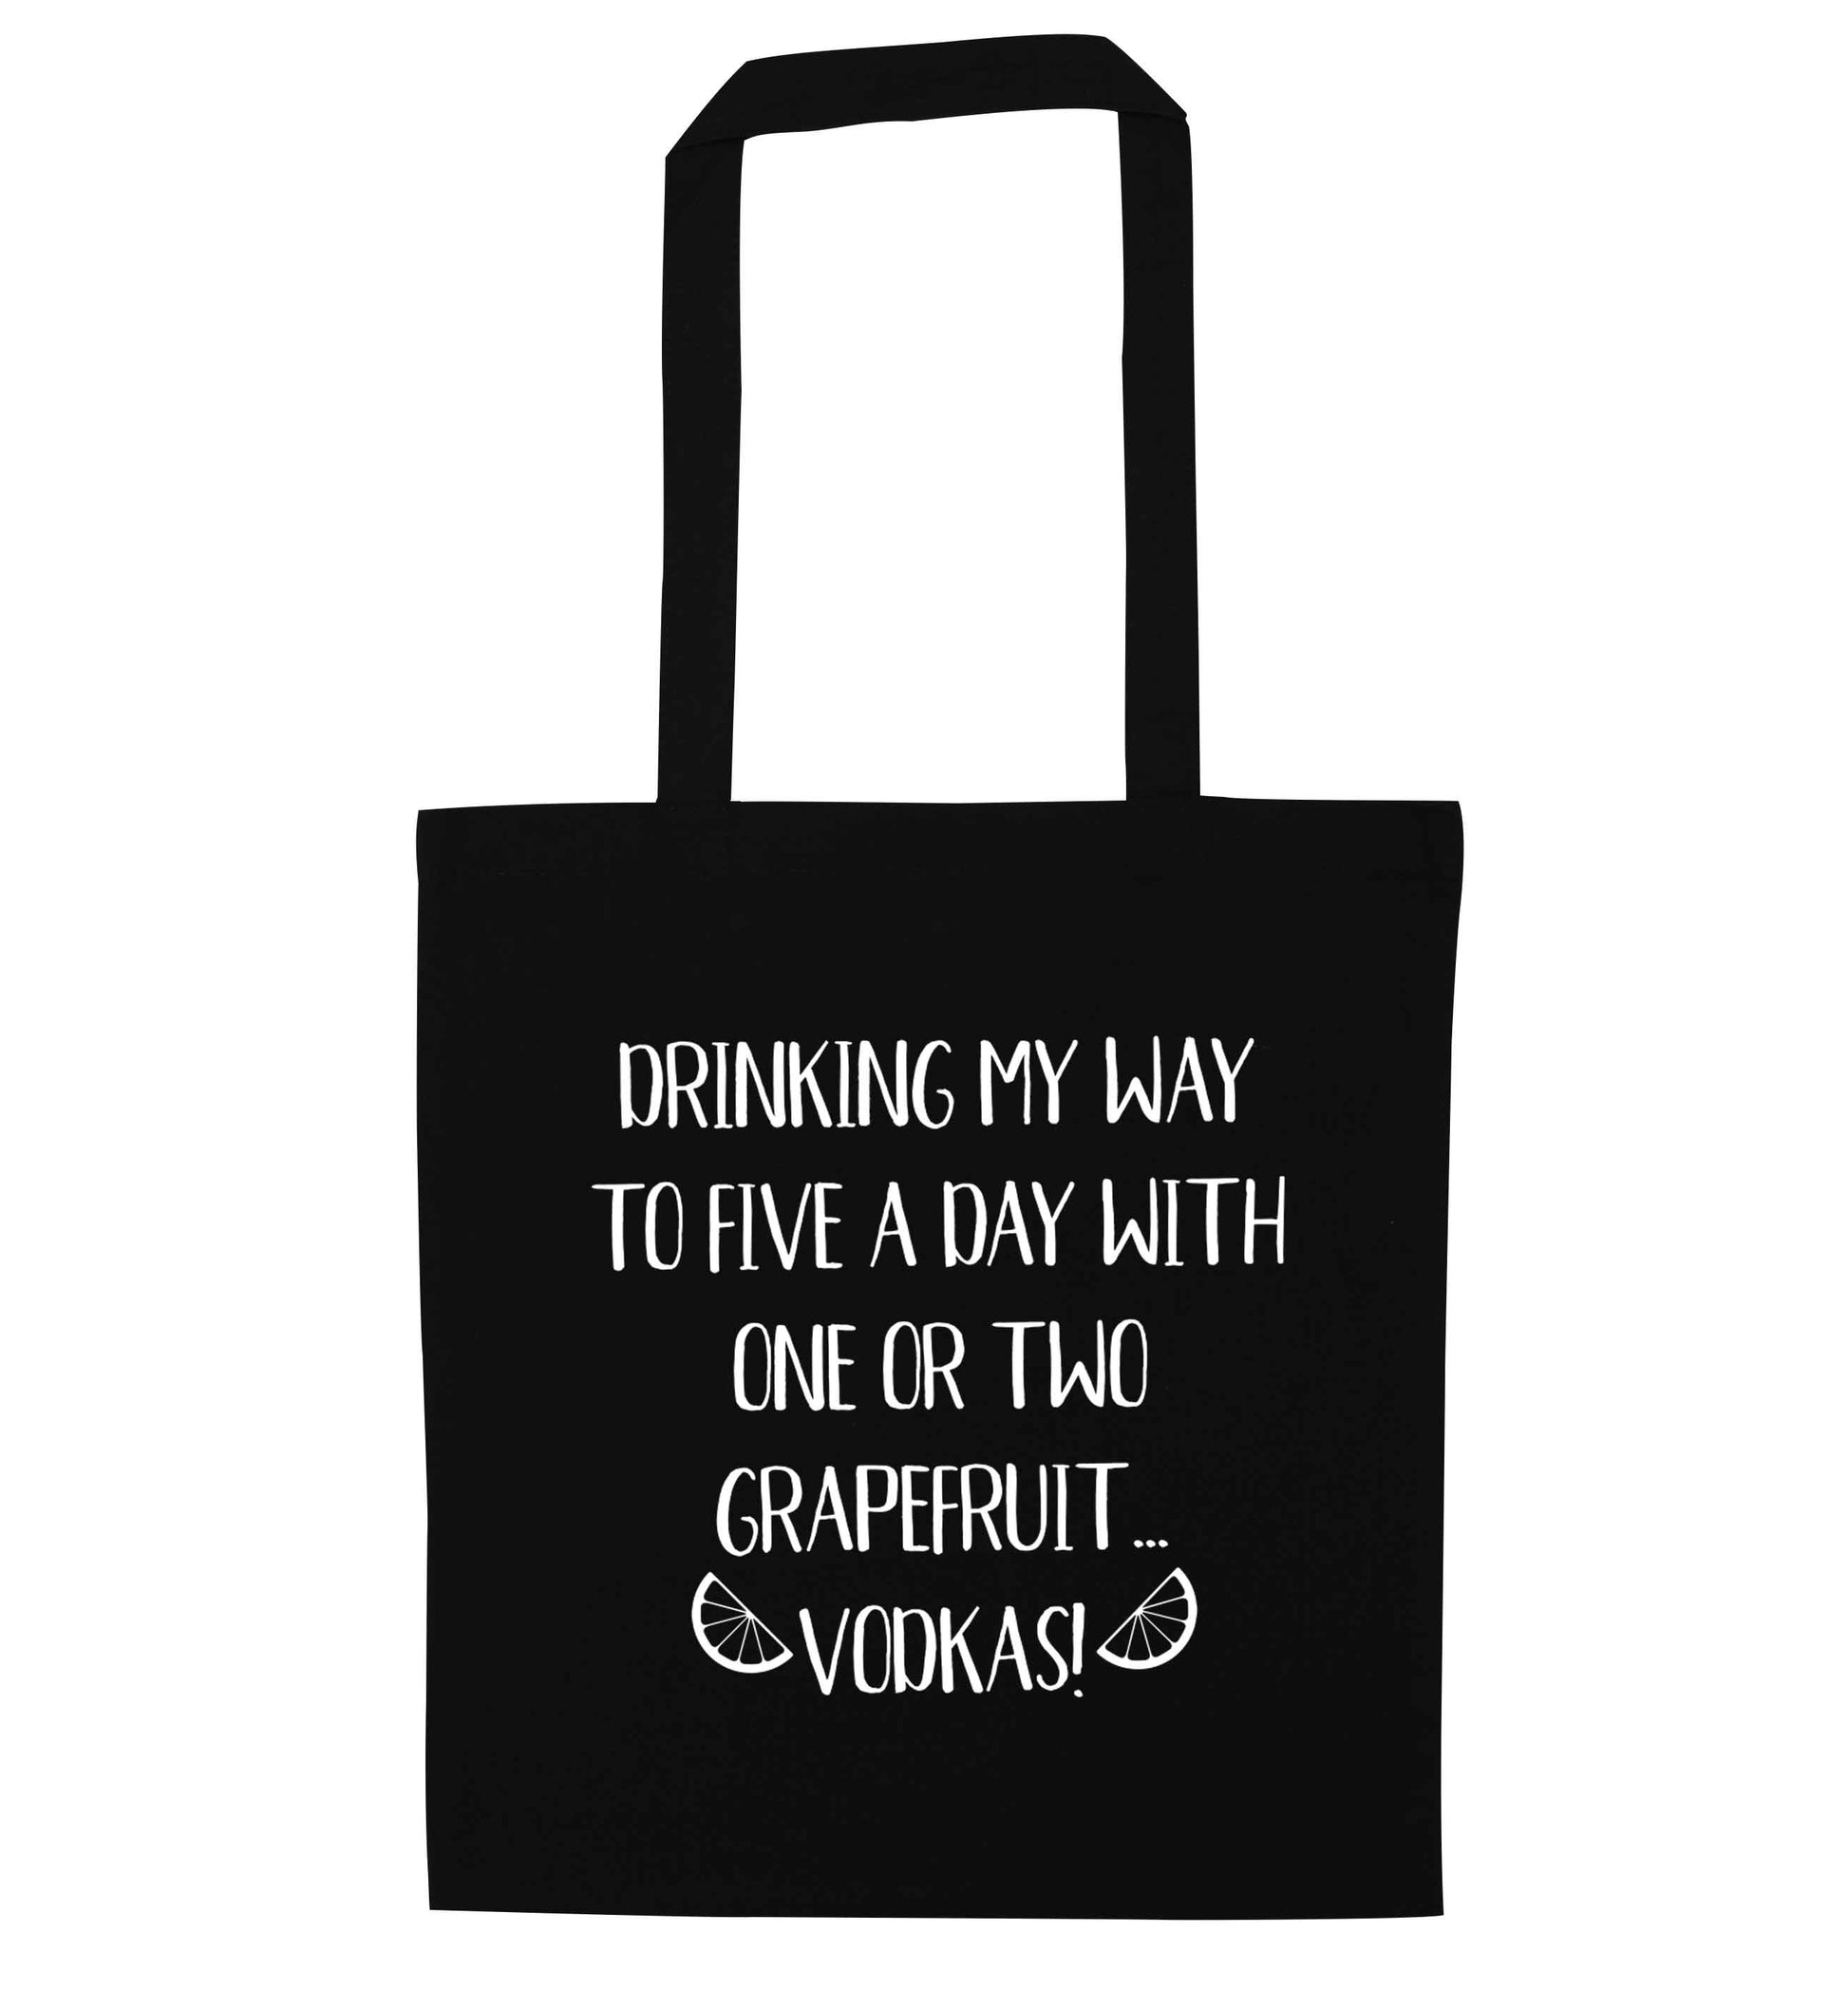 Drinking my way to five a day with one or two grapefruit vodkas black tote bag